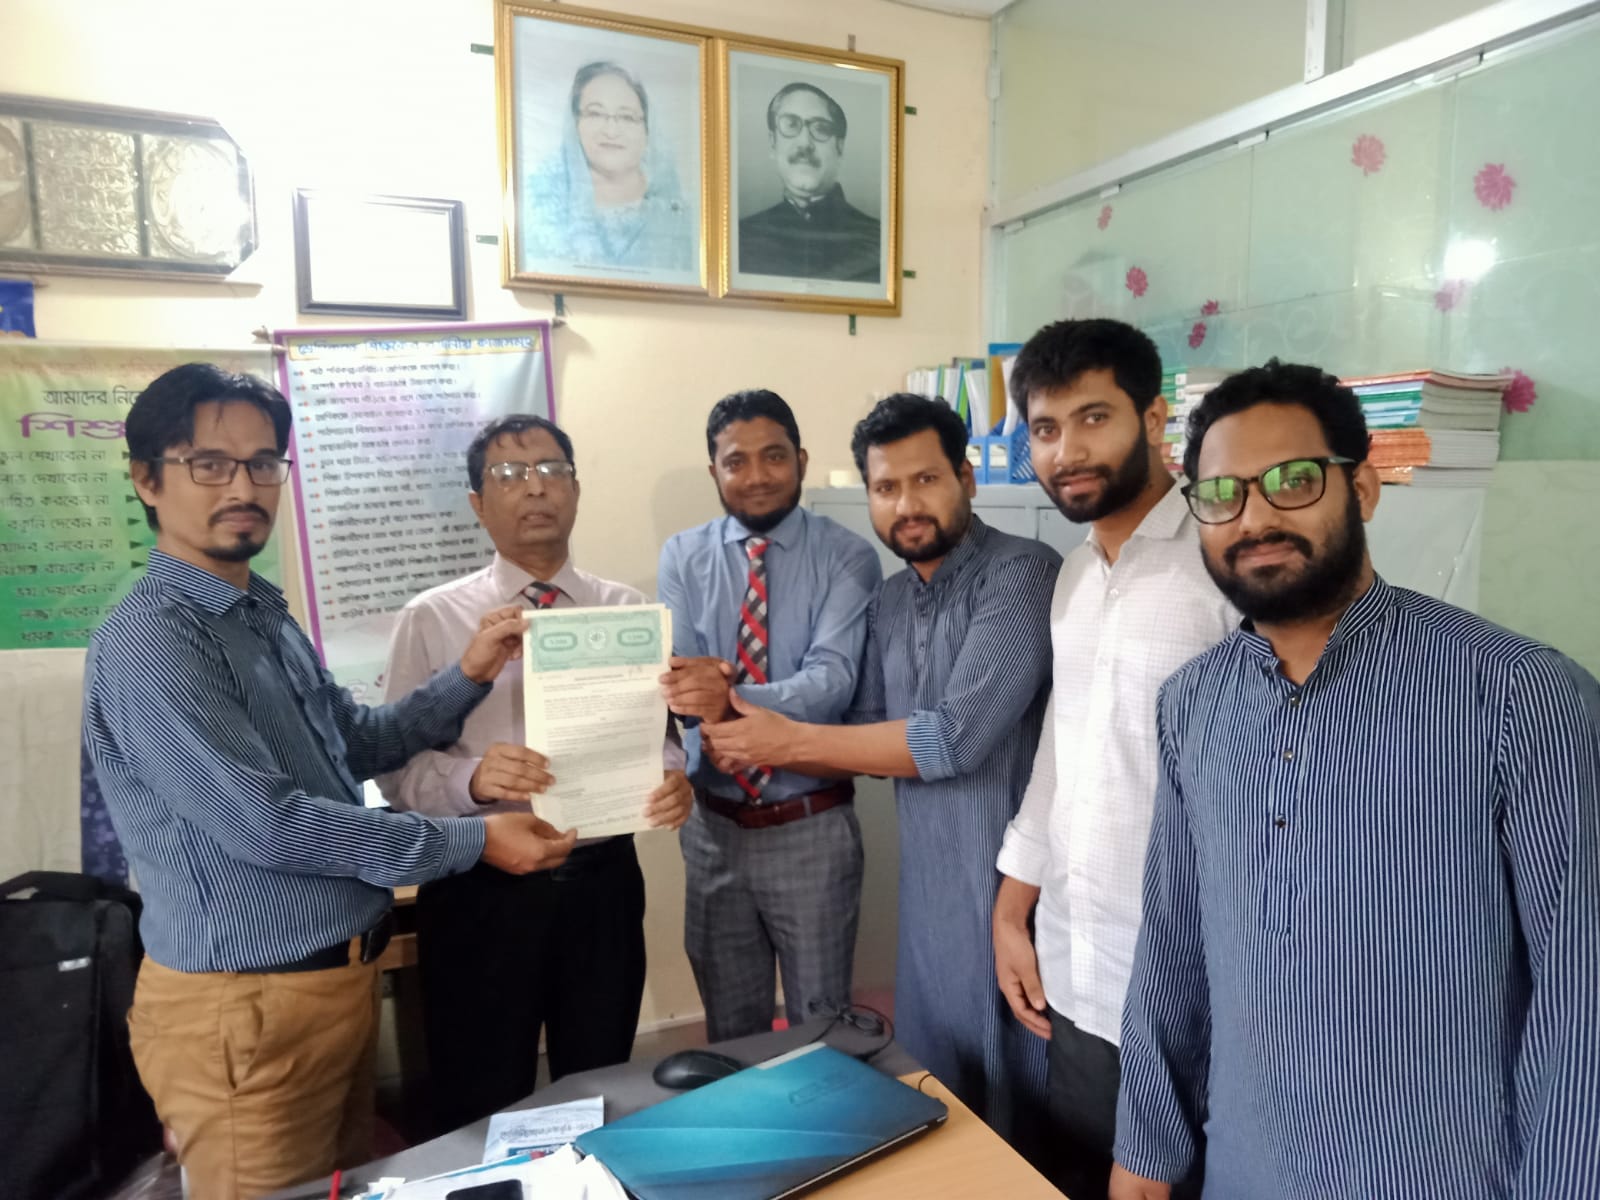 All student fees are collected through FirstCash, as per the agreement signed between First Security Islami Bank Limited and S.A. Chowdhury Institute, Kumira, Chittagong.